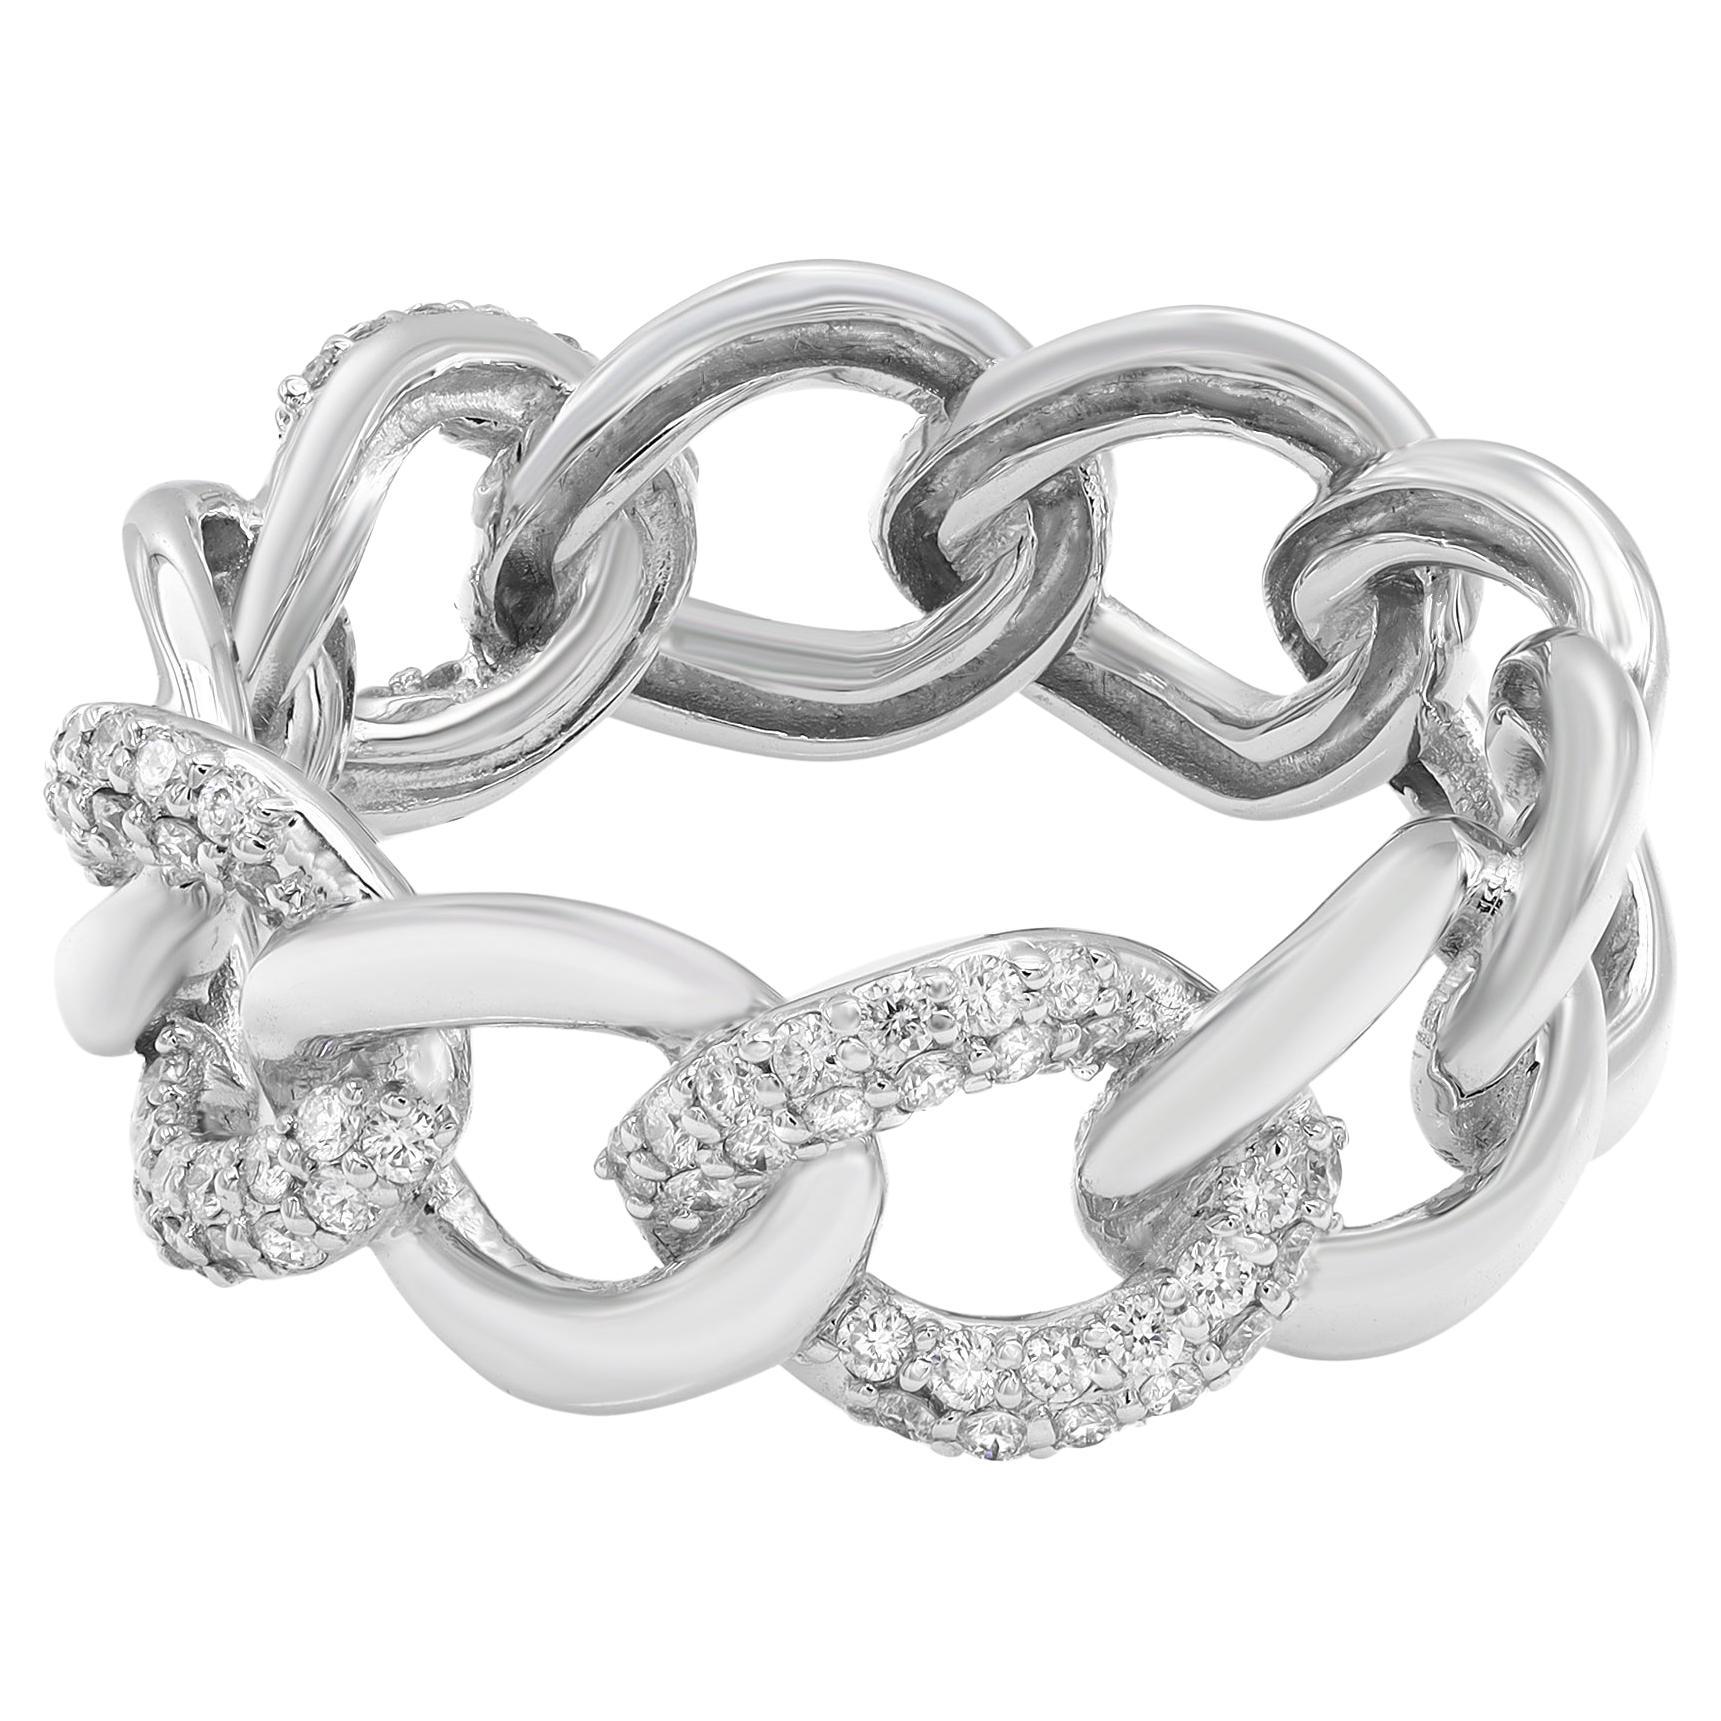 Pave Set Round Cut Diamond Chain Link Ring Band 18K White Gold 0.39cttw